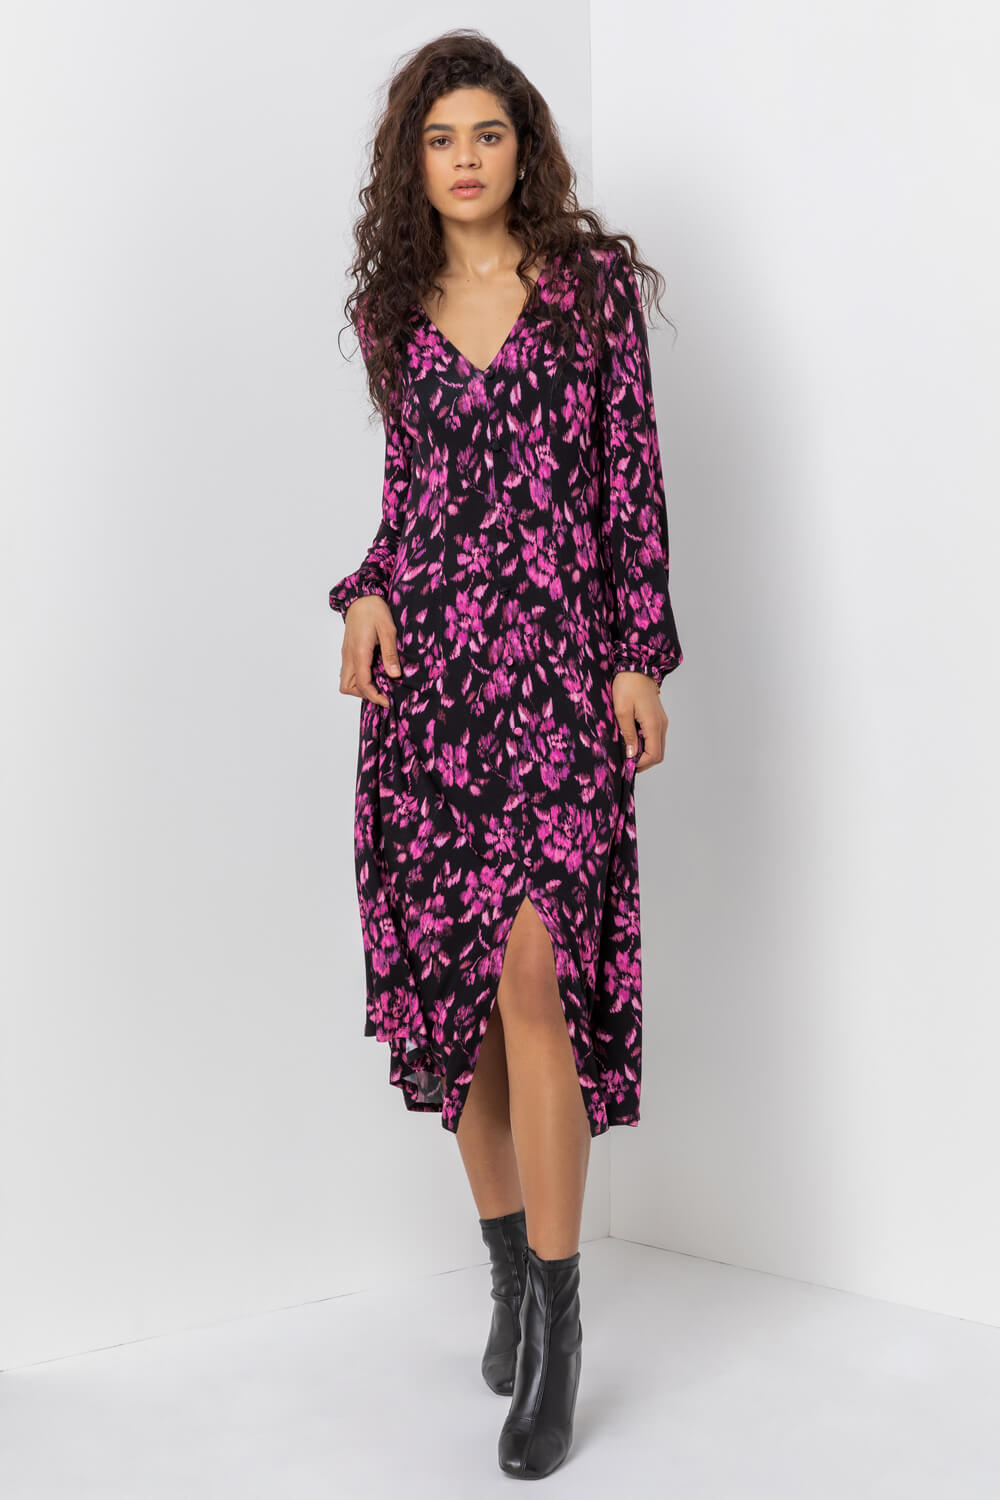 Purple Abstract Floral Fit & Flare Midi Dress, Image 5 of 5